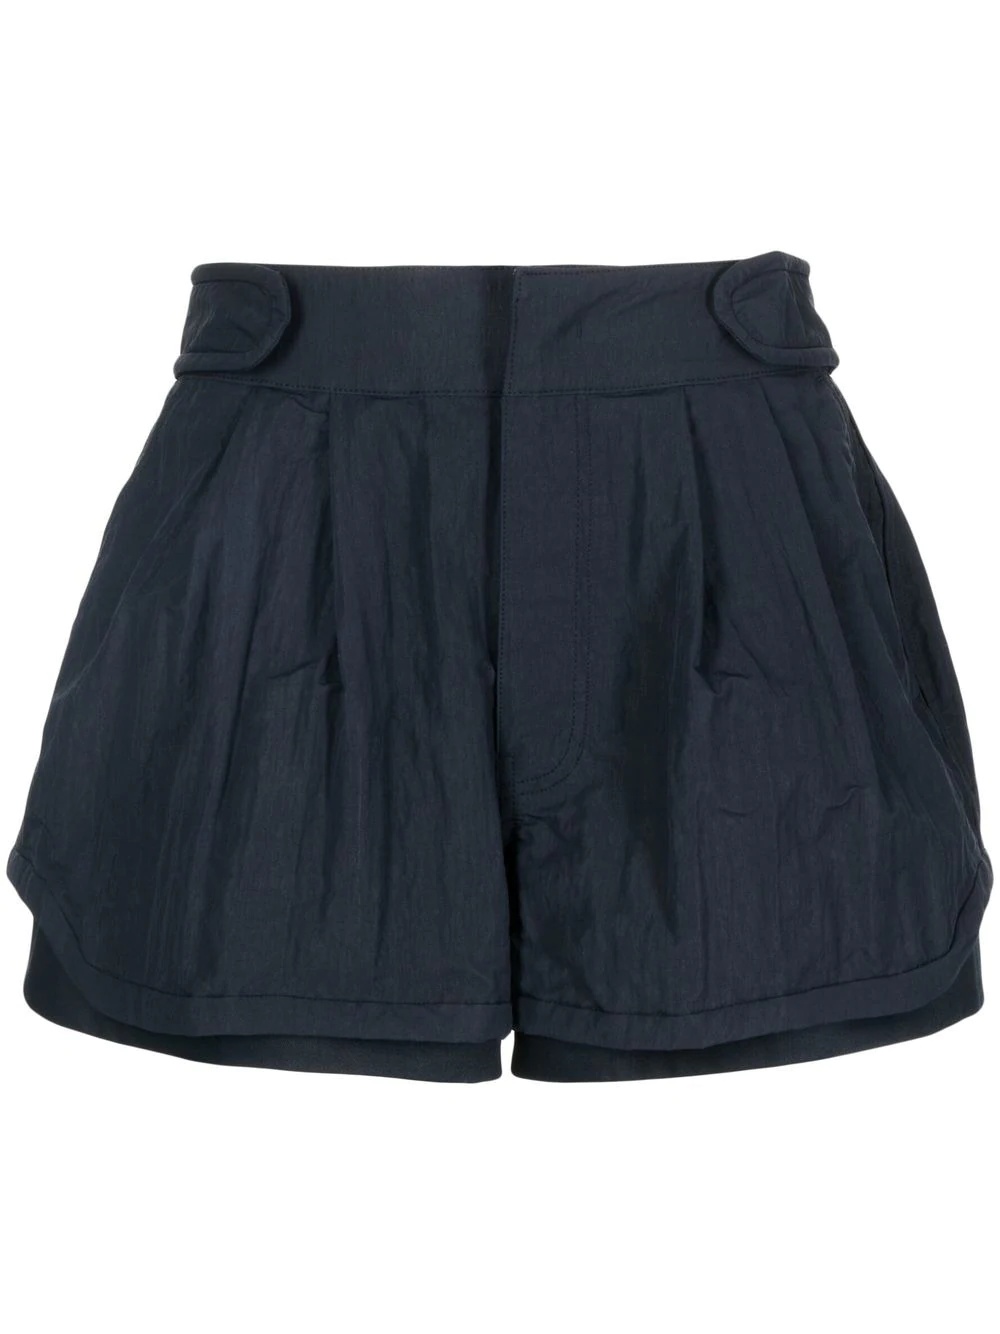 crease-effect pleated shorts - 1